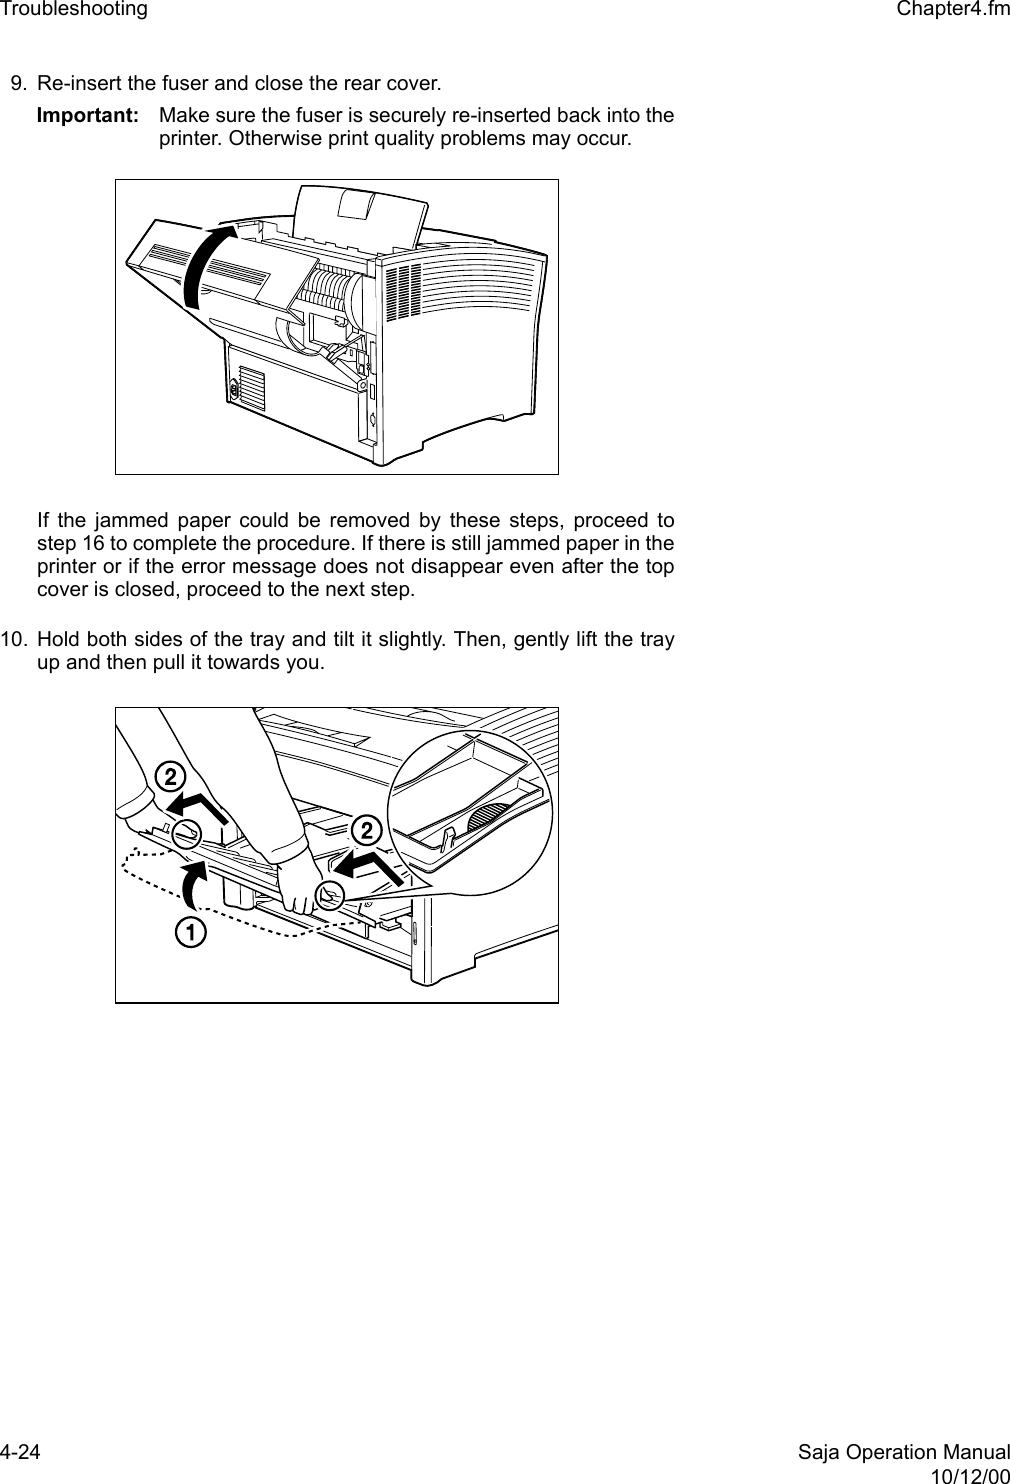 4-24 Saja Operation Manual10/12/00Troubleshooting  Chapter4.fm9. Re-insert the fuser and close the rear cover.Important: Make sure the fuser is securely re-inserted back into theprinter. Otherwise print quality problems may occur.If the jammed paper could be removed by these steps, proceed tostep 16 to complete the procedure. If there is still jammed paper in theprinter or if the error message does not disappear even after the topcover is closed, proceed to the next step. 10. Hold both sides of the tray and tilt it slightly. Then, gently lift the trayup and then pull it towards you.